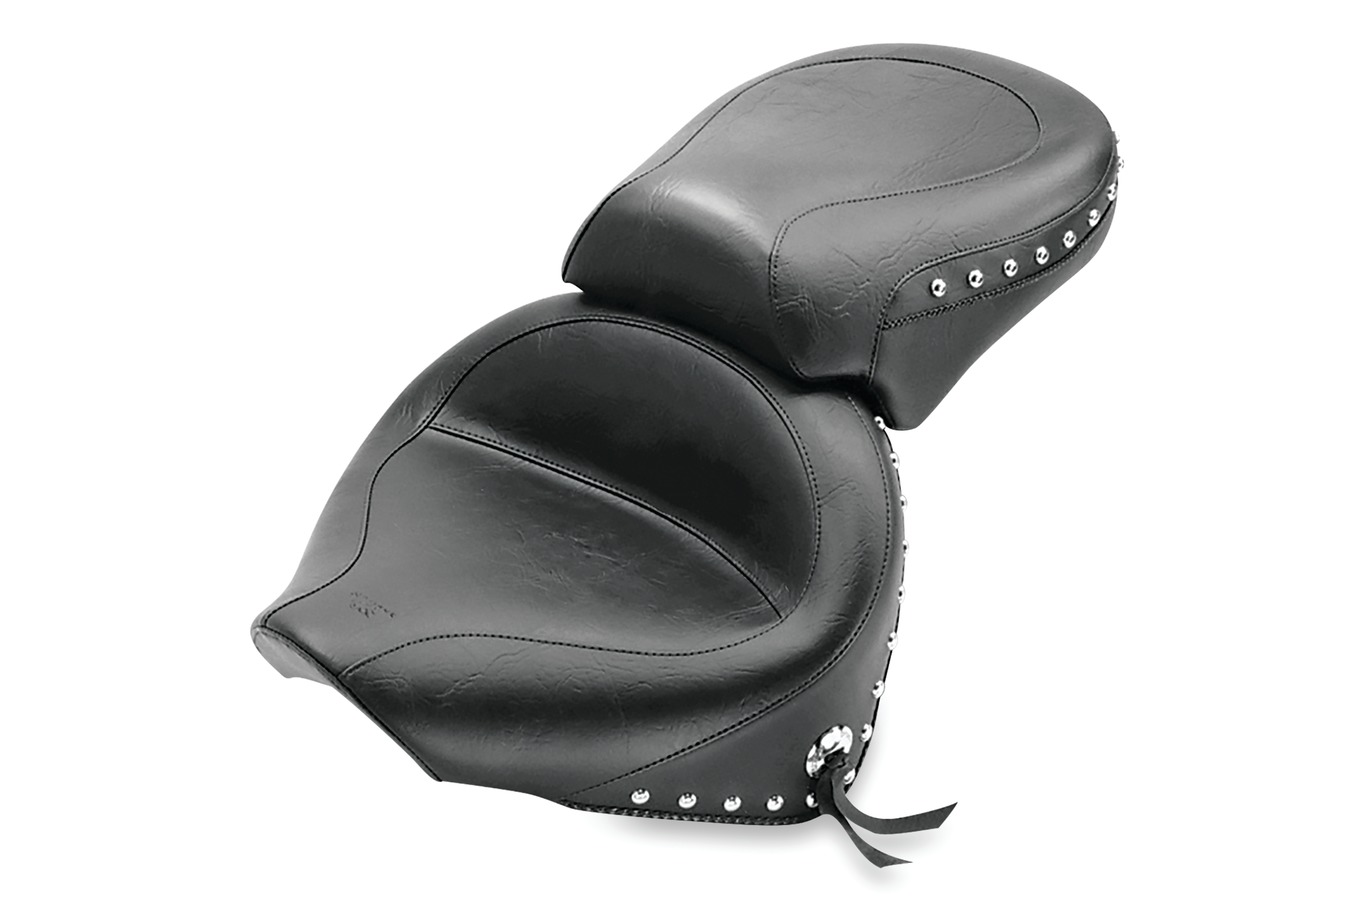 Wide Touring Two-Piece Seat for Yamaha V-Star 1100 Classic 2000-